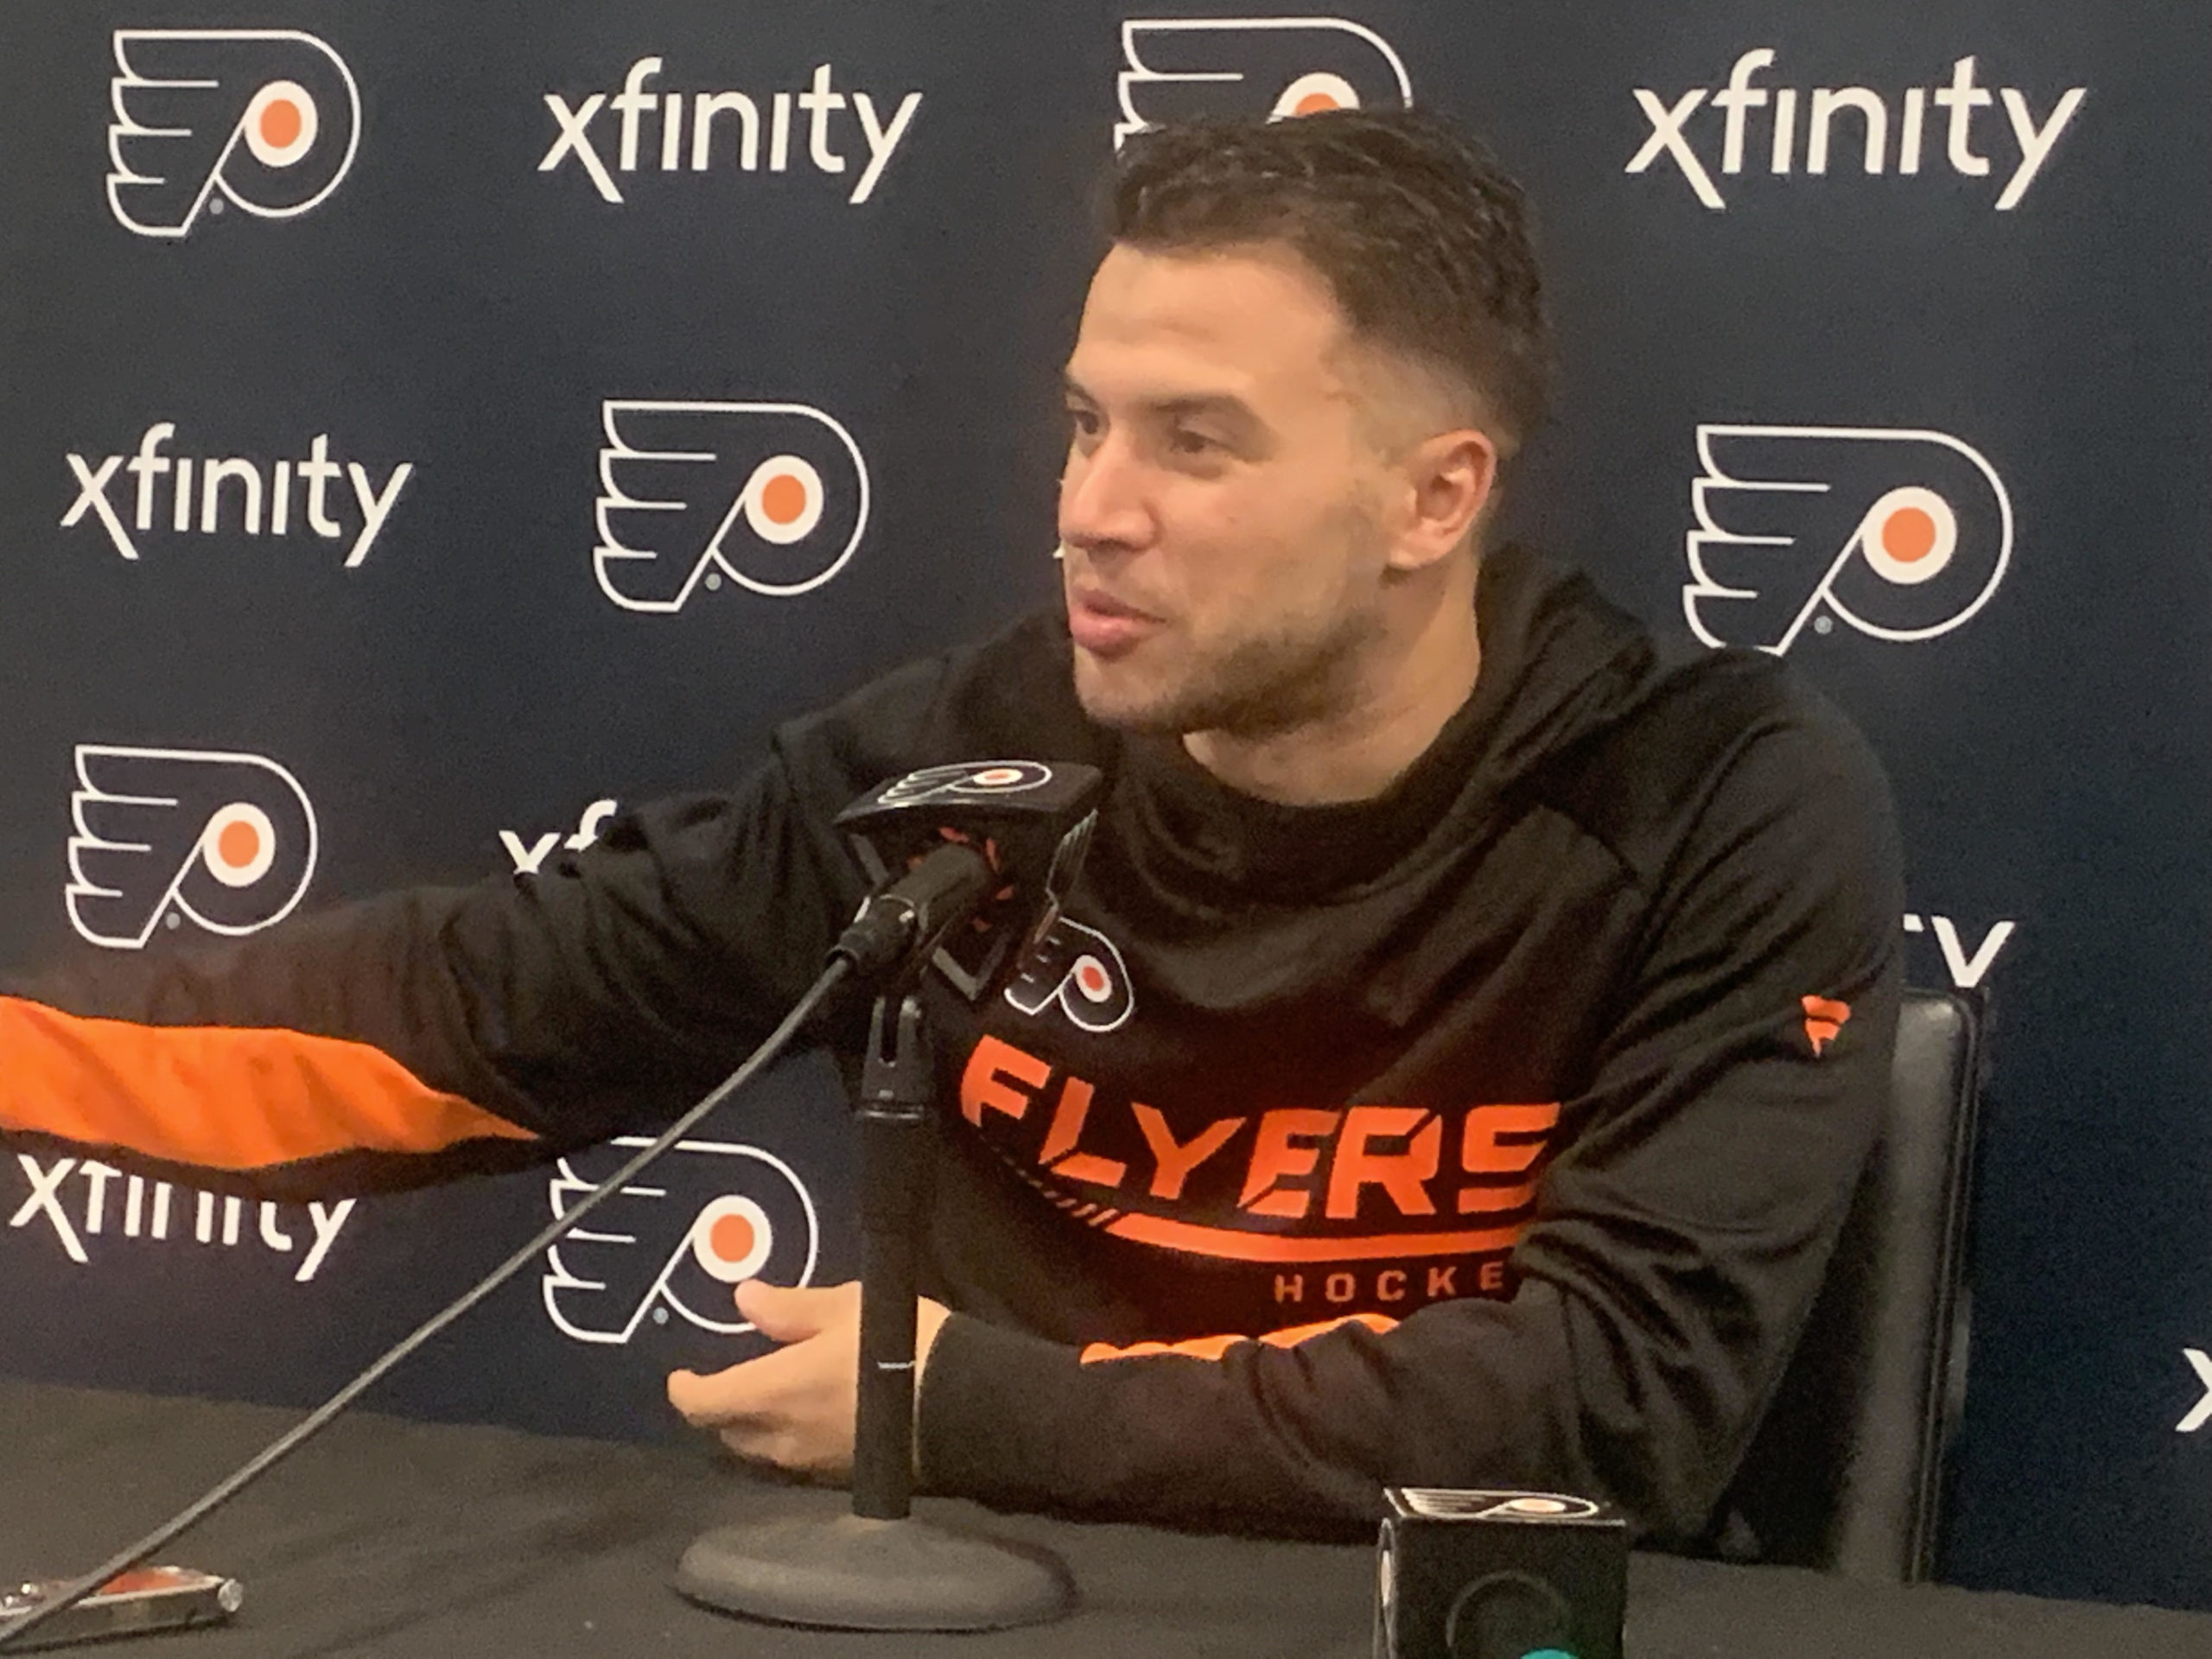 Flyers' Tony DeAngelo: 'I'm absolutely not racist at all